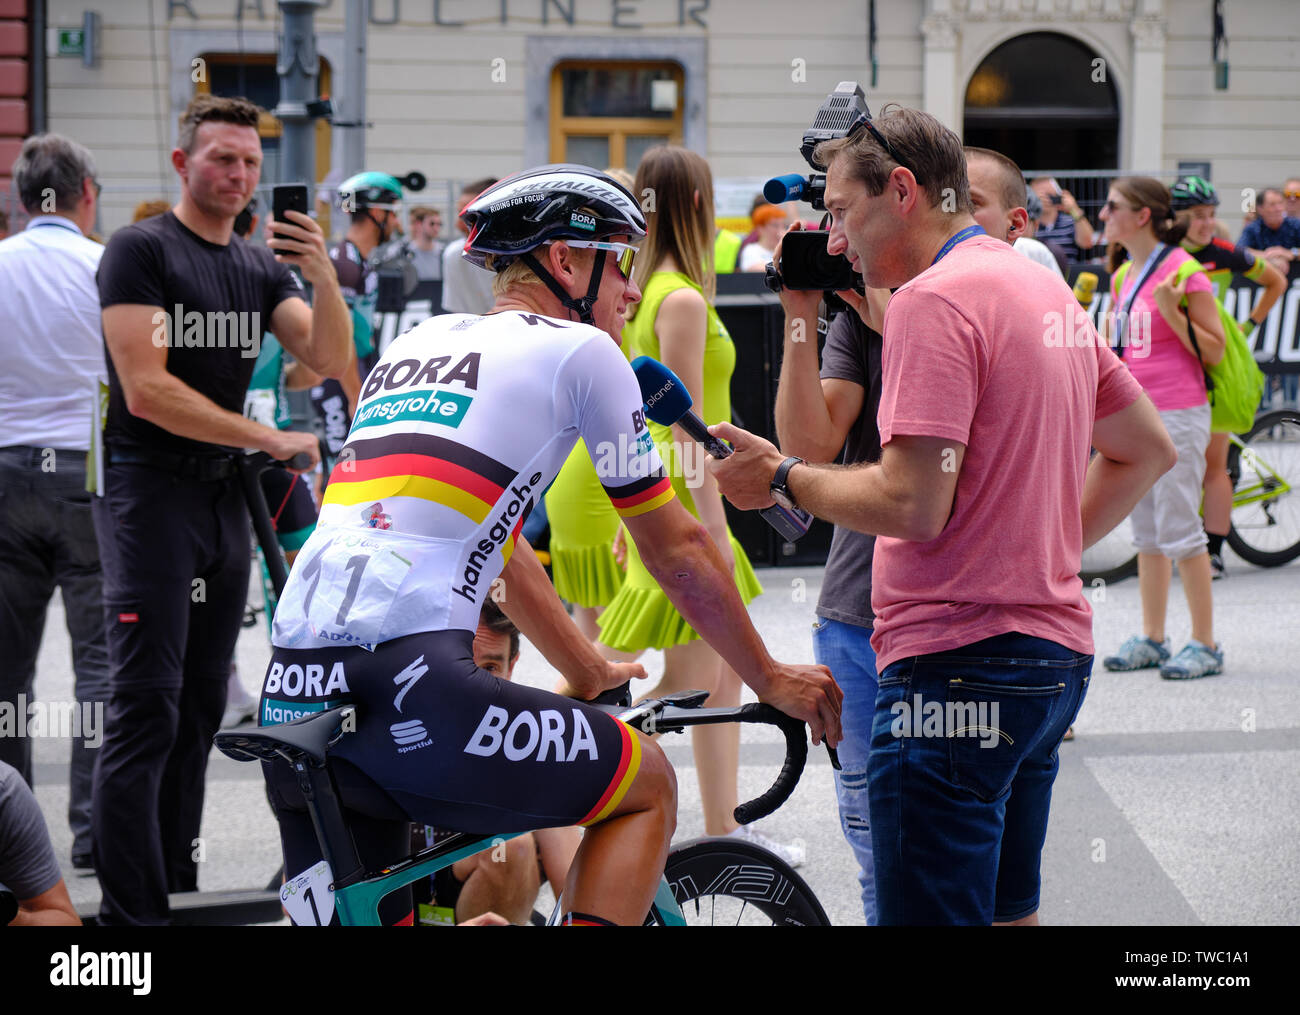 Pascal Ackermann of Team Bora - Hansgrohe being interviewed by RTV SLO prior to departure of Tour of Slovenia stage one race, Ljubljana, June 2019 Stock Photo